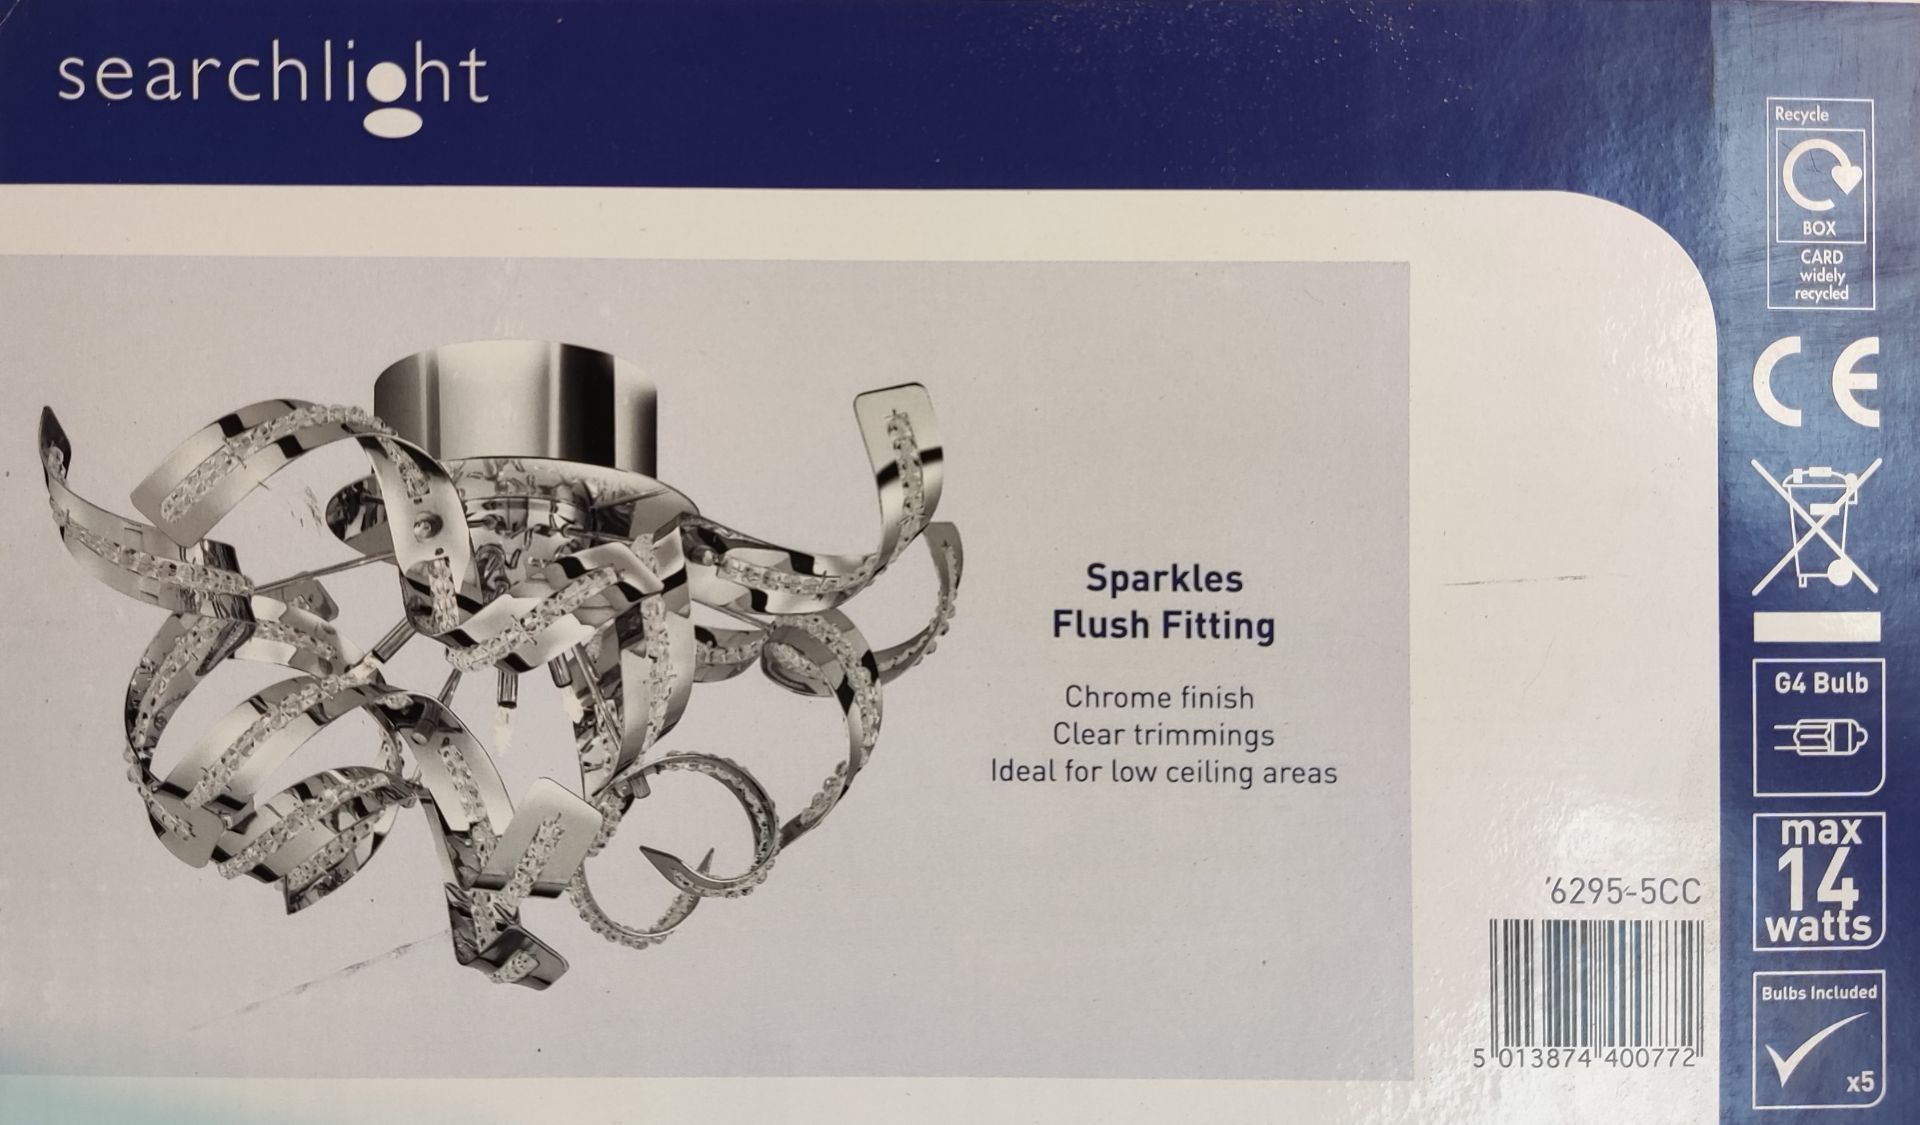 1 x Searchlight Sparkles Flush Fitting - Chrome Finish, Clear Trimmings - New Boxed Stock - CL323 - - Image 2 of 2